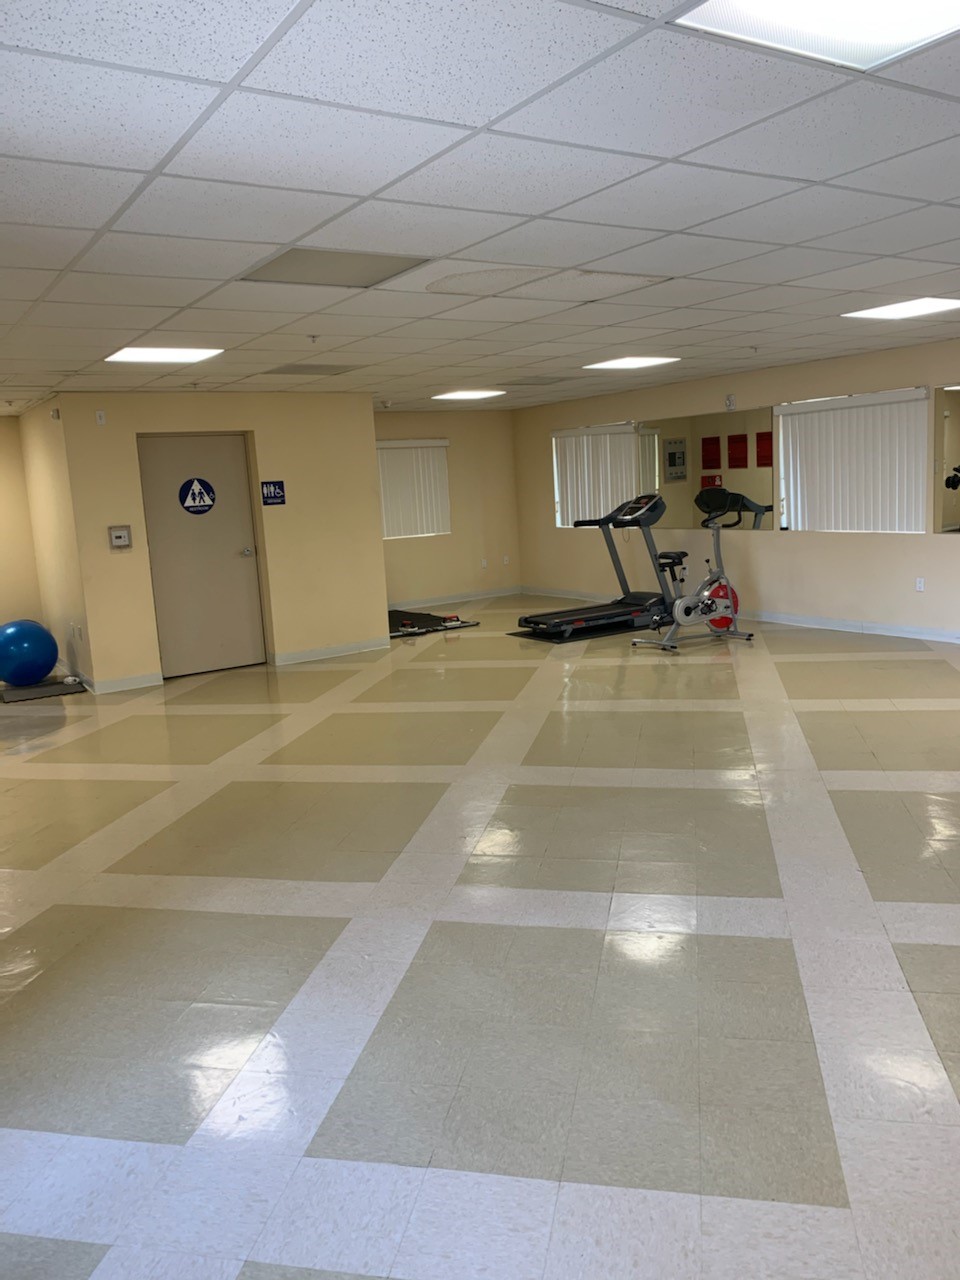 View of a large room with a trreadmill, exercise bike, and a yoga ball. Thre is a gender neutral restroom and the floor is tiled.